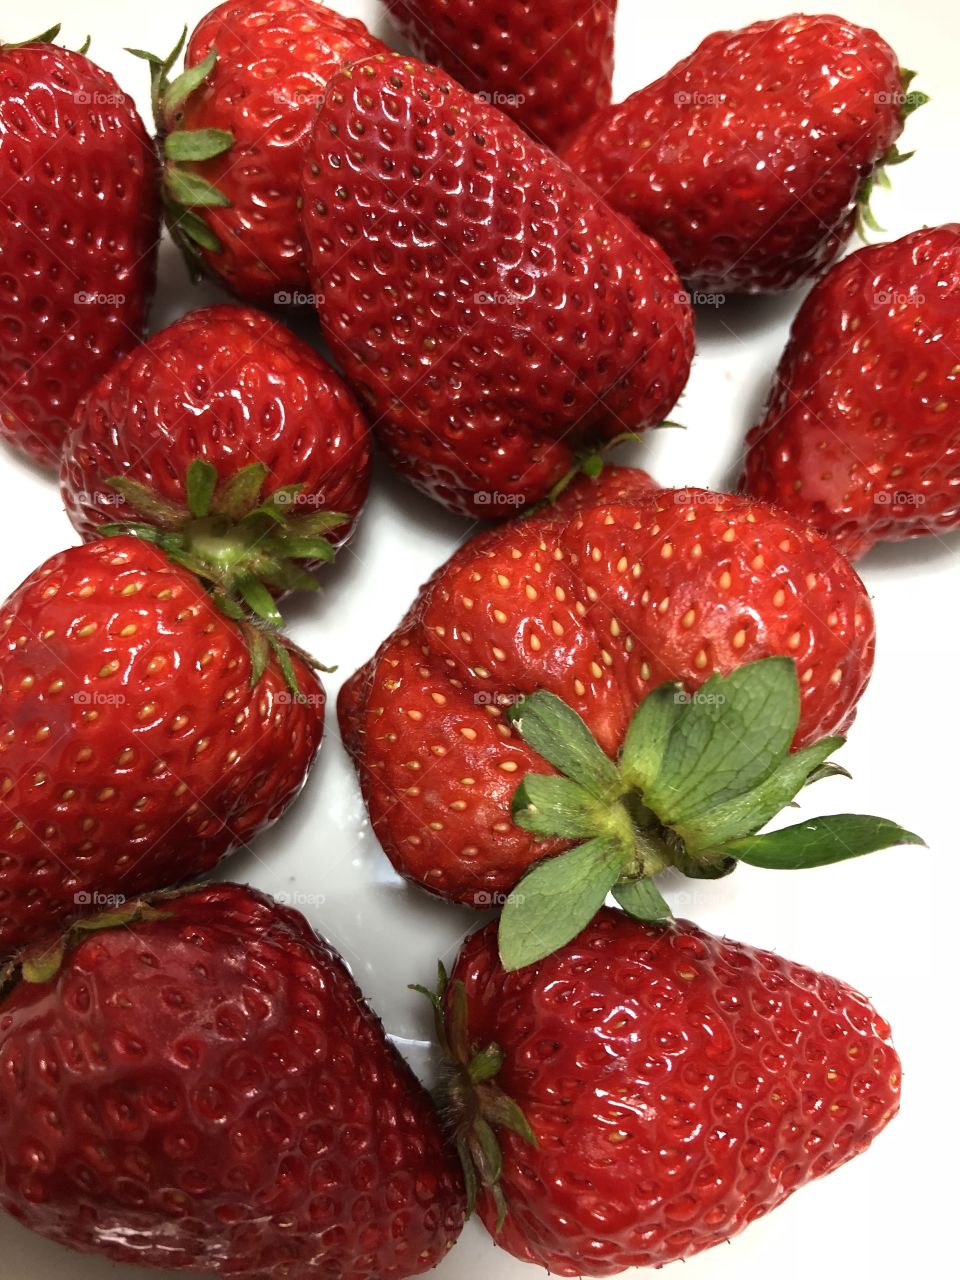 Perfect Japanese greenhouse grown giant strawberries